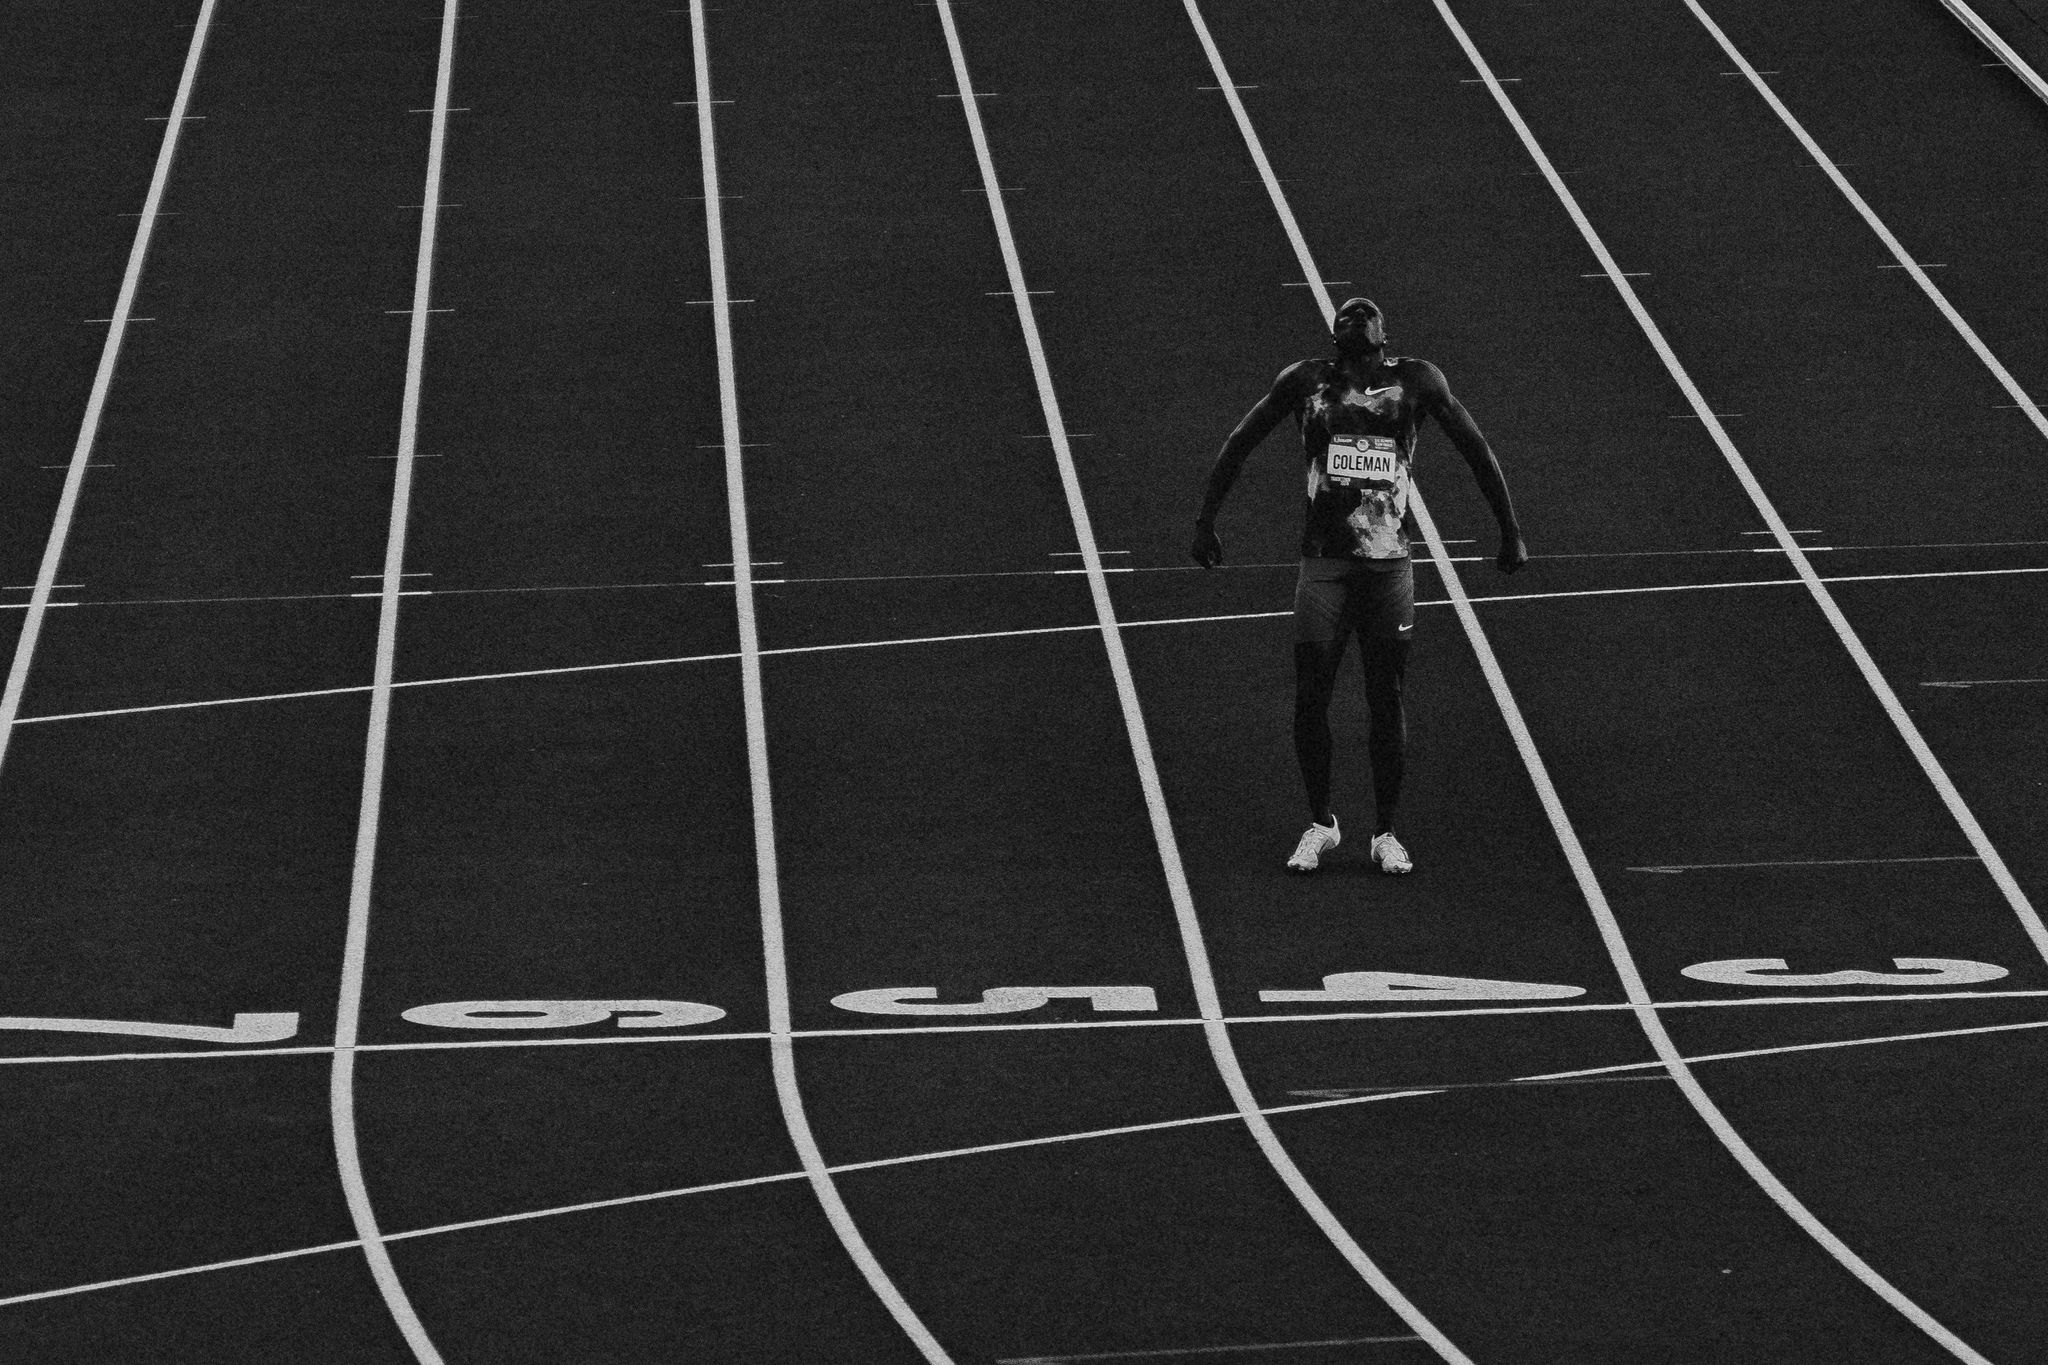 a single runner celebrates on a track